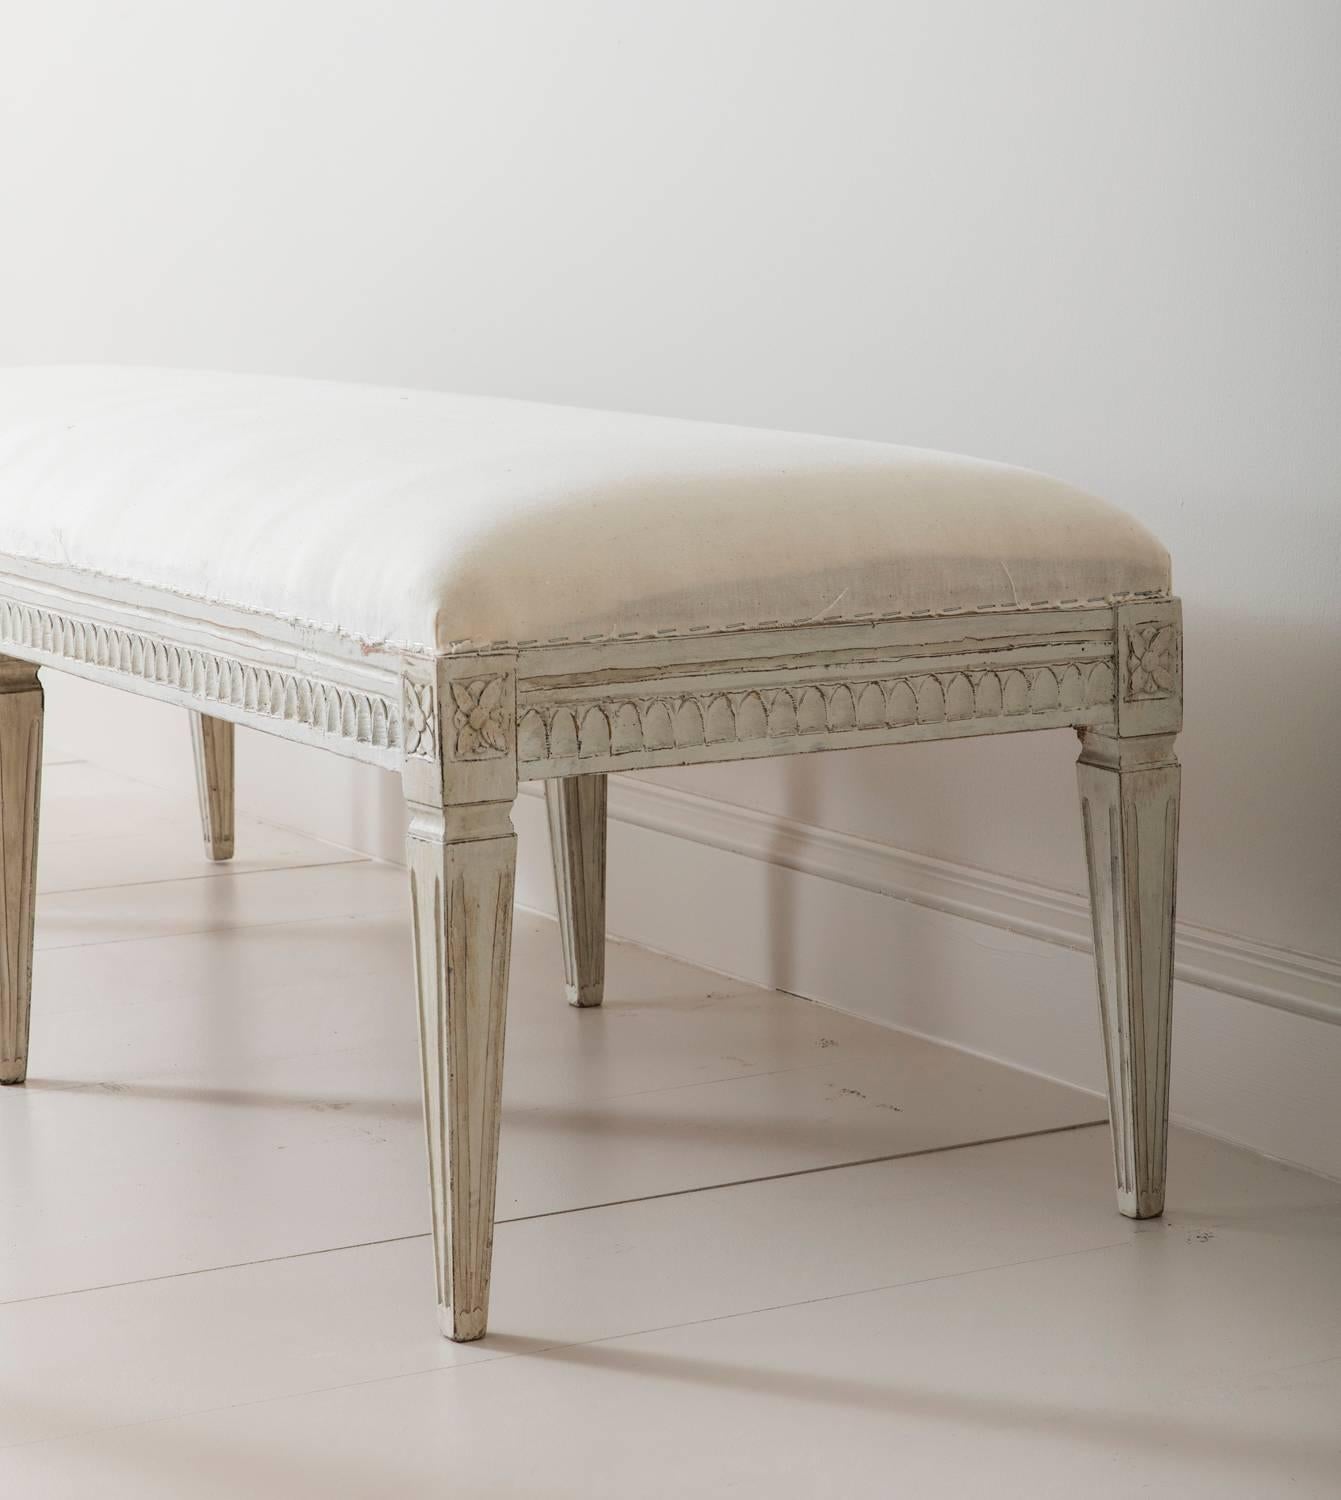 Hand-Crafted 19th Century Swedish Gustavian Period Footstool or Bench